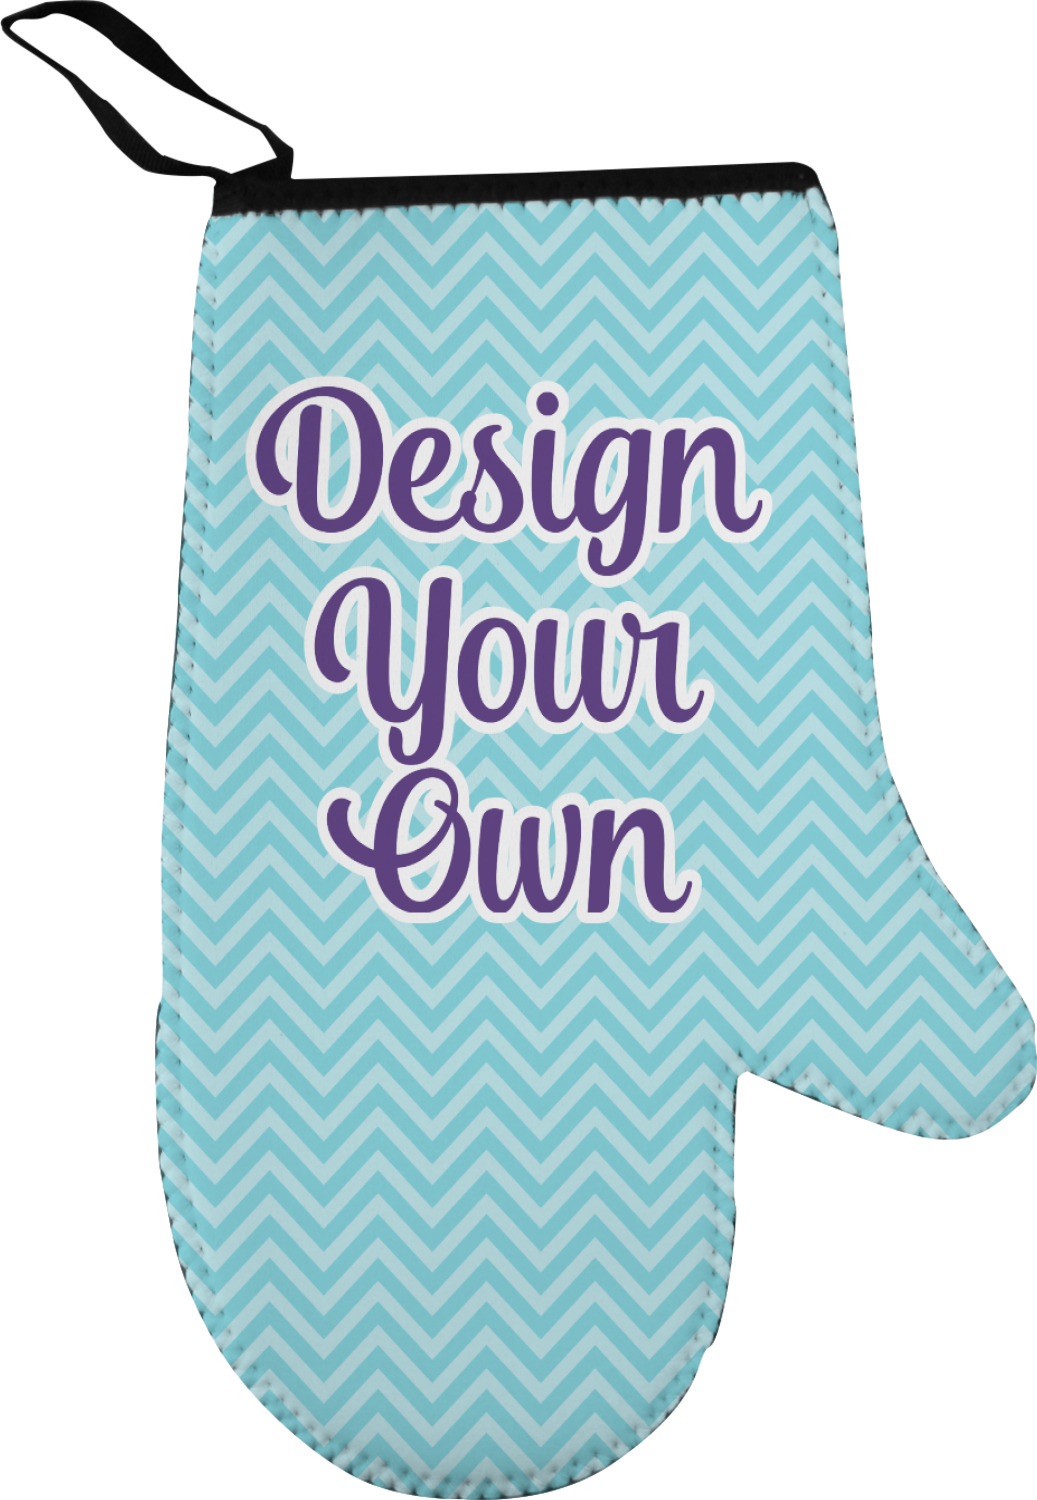 Add Your Logo: Completely Custom Oven Mitts – Baudville